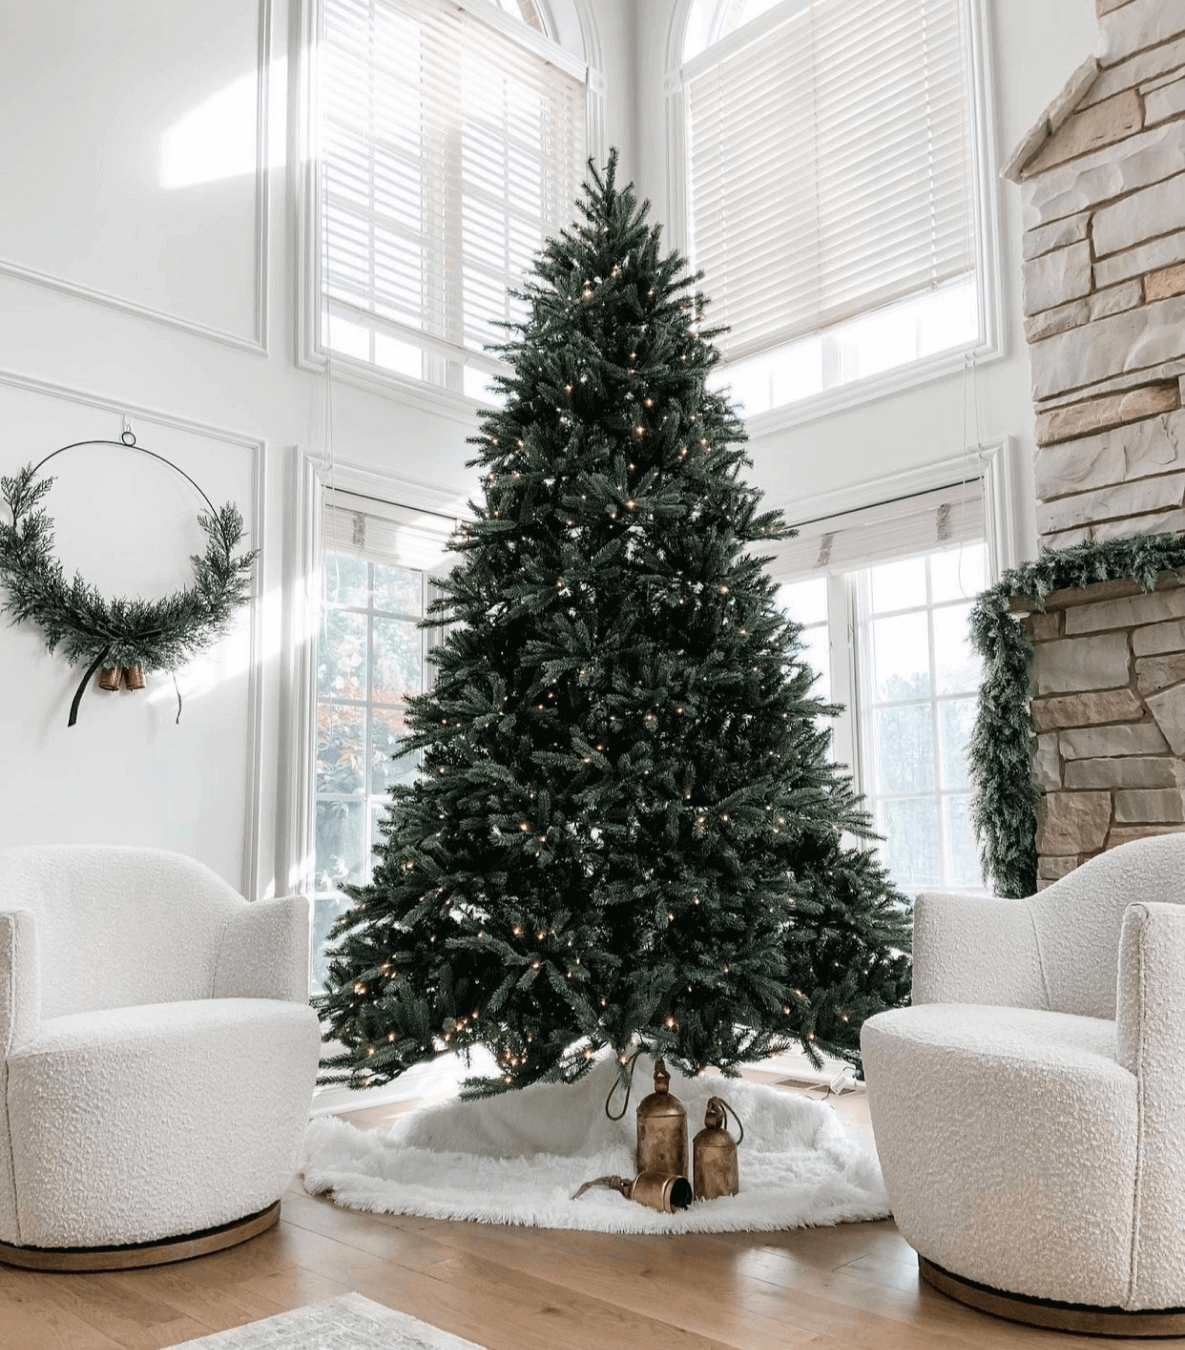 King of Christmas 9' King Fraser Fir Quick-Shape Artificial Christmas Tree with 1200 Warm White & Multi-Color LED Lights